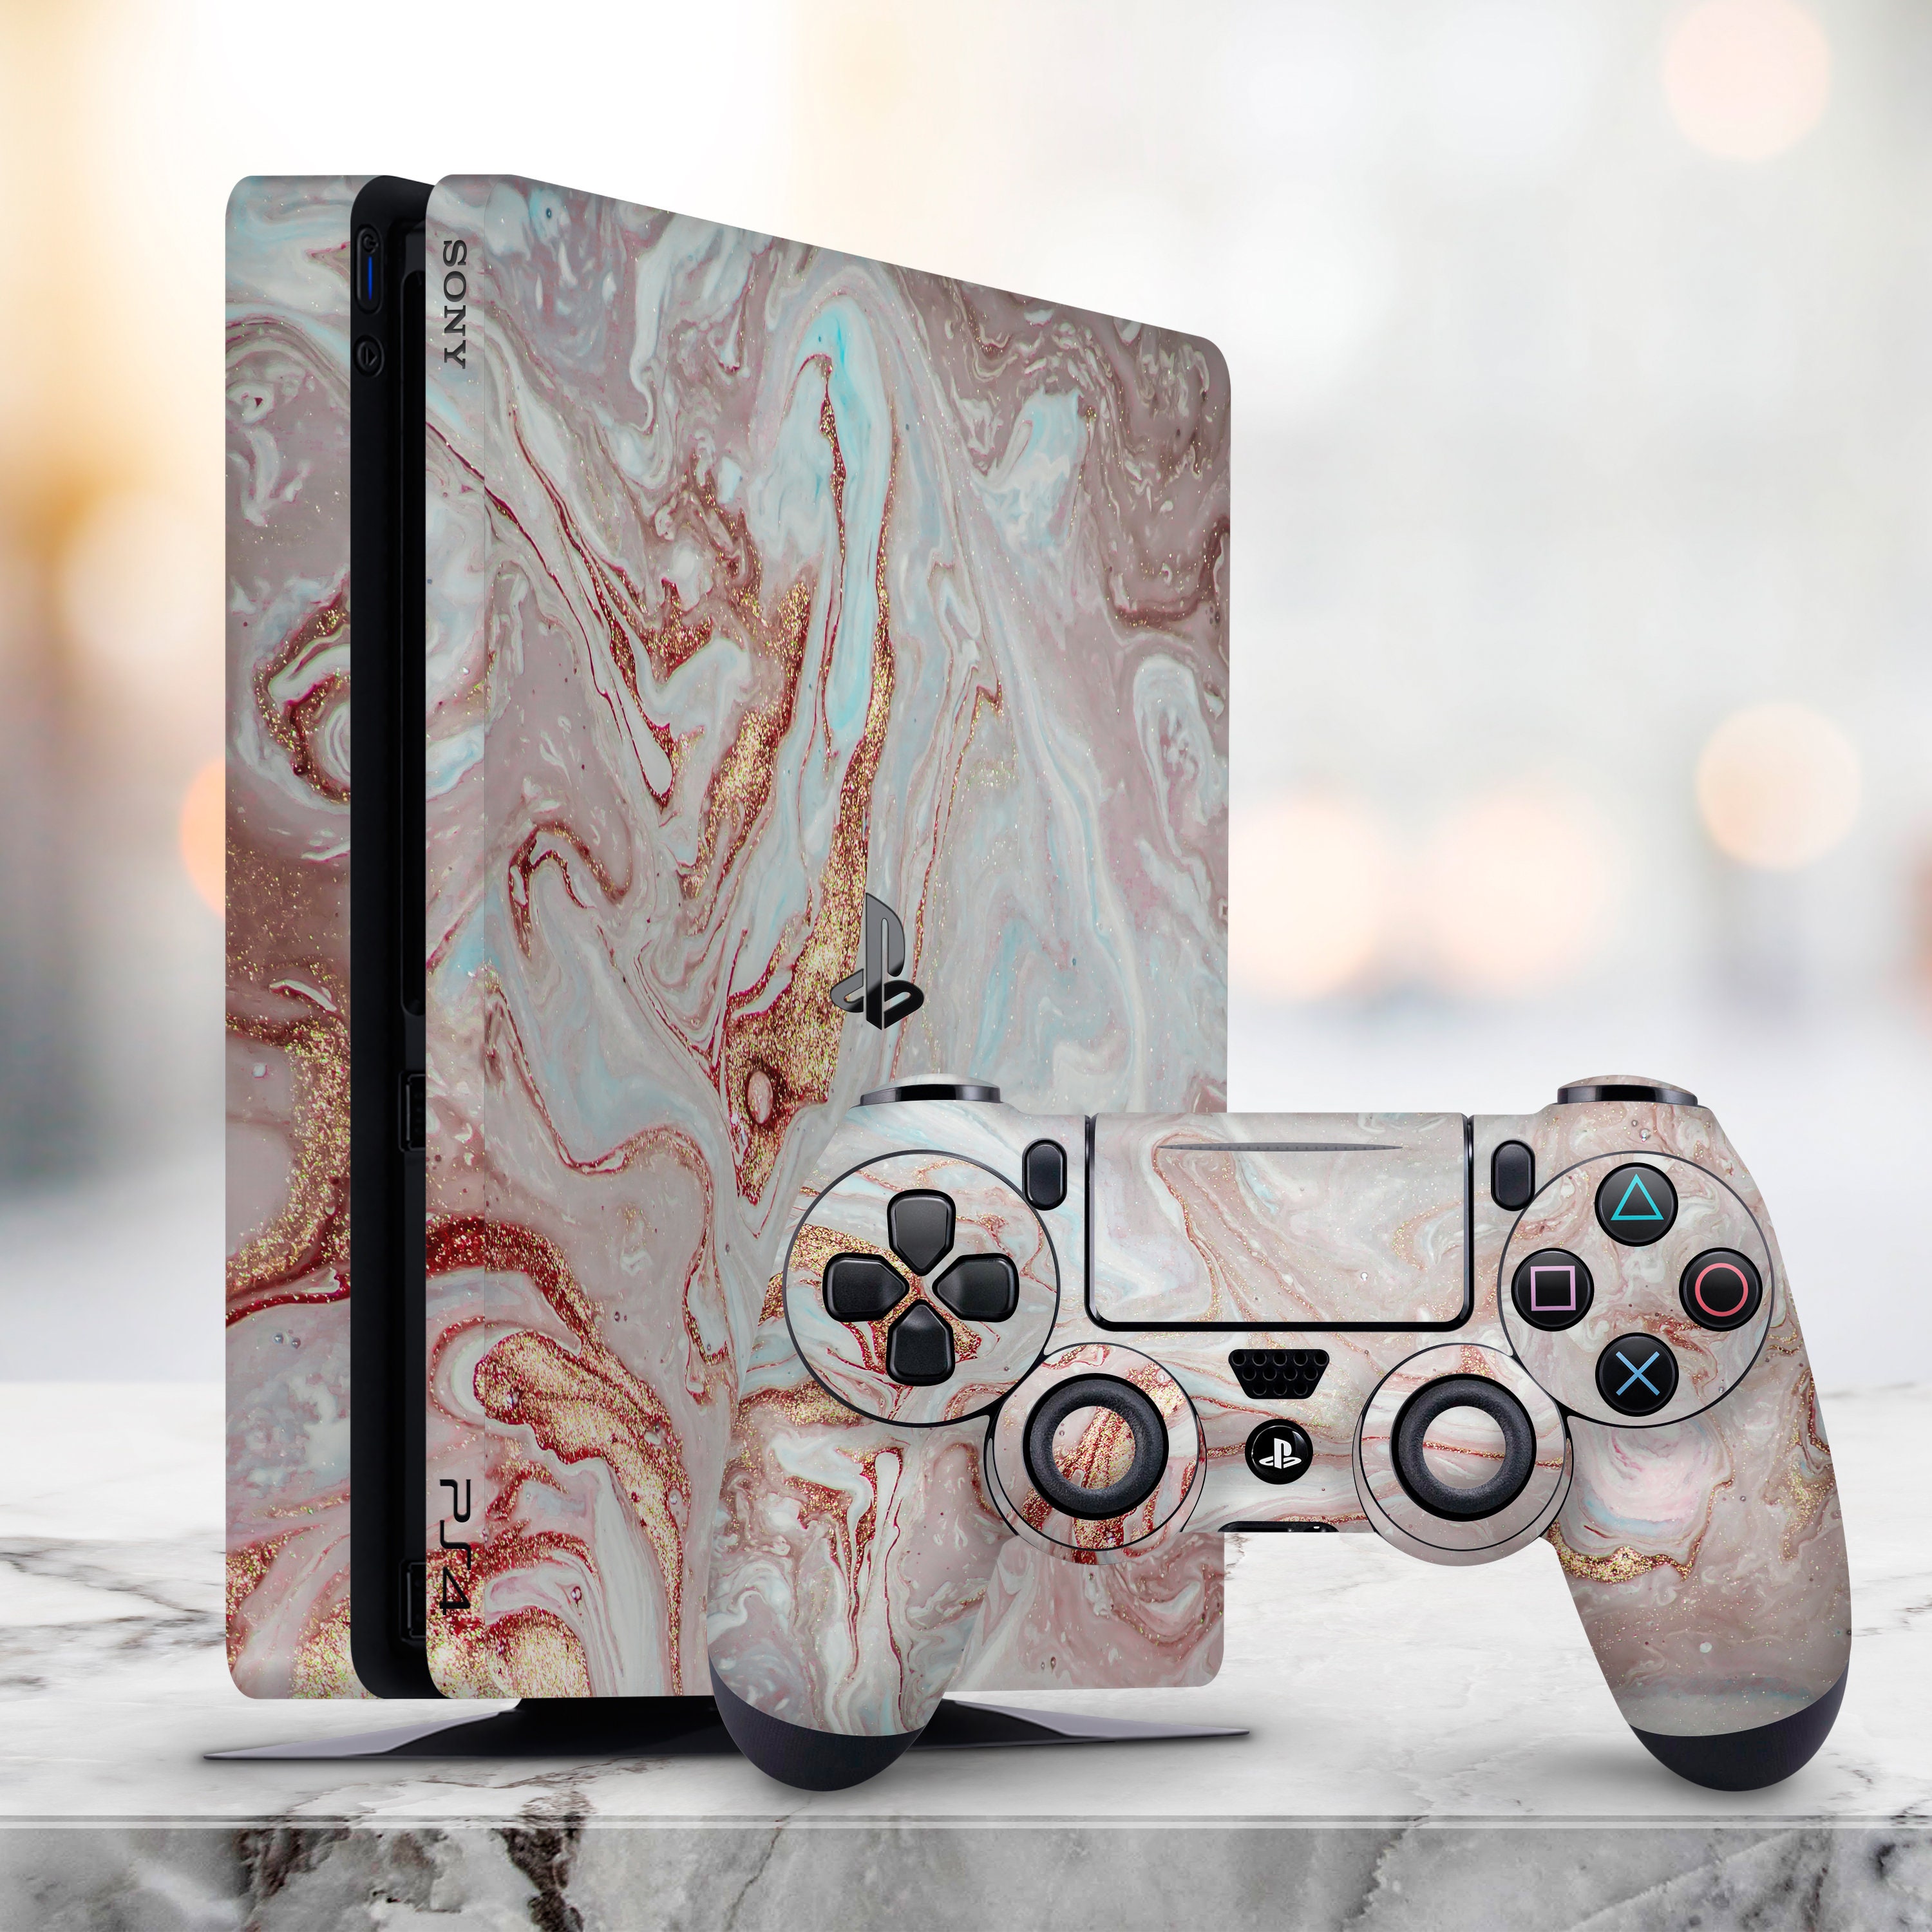 Ambur® PS4 Console Designer Skin for Sony PlayStation 4 System